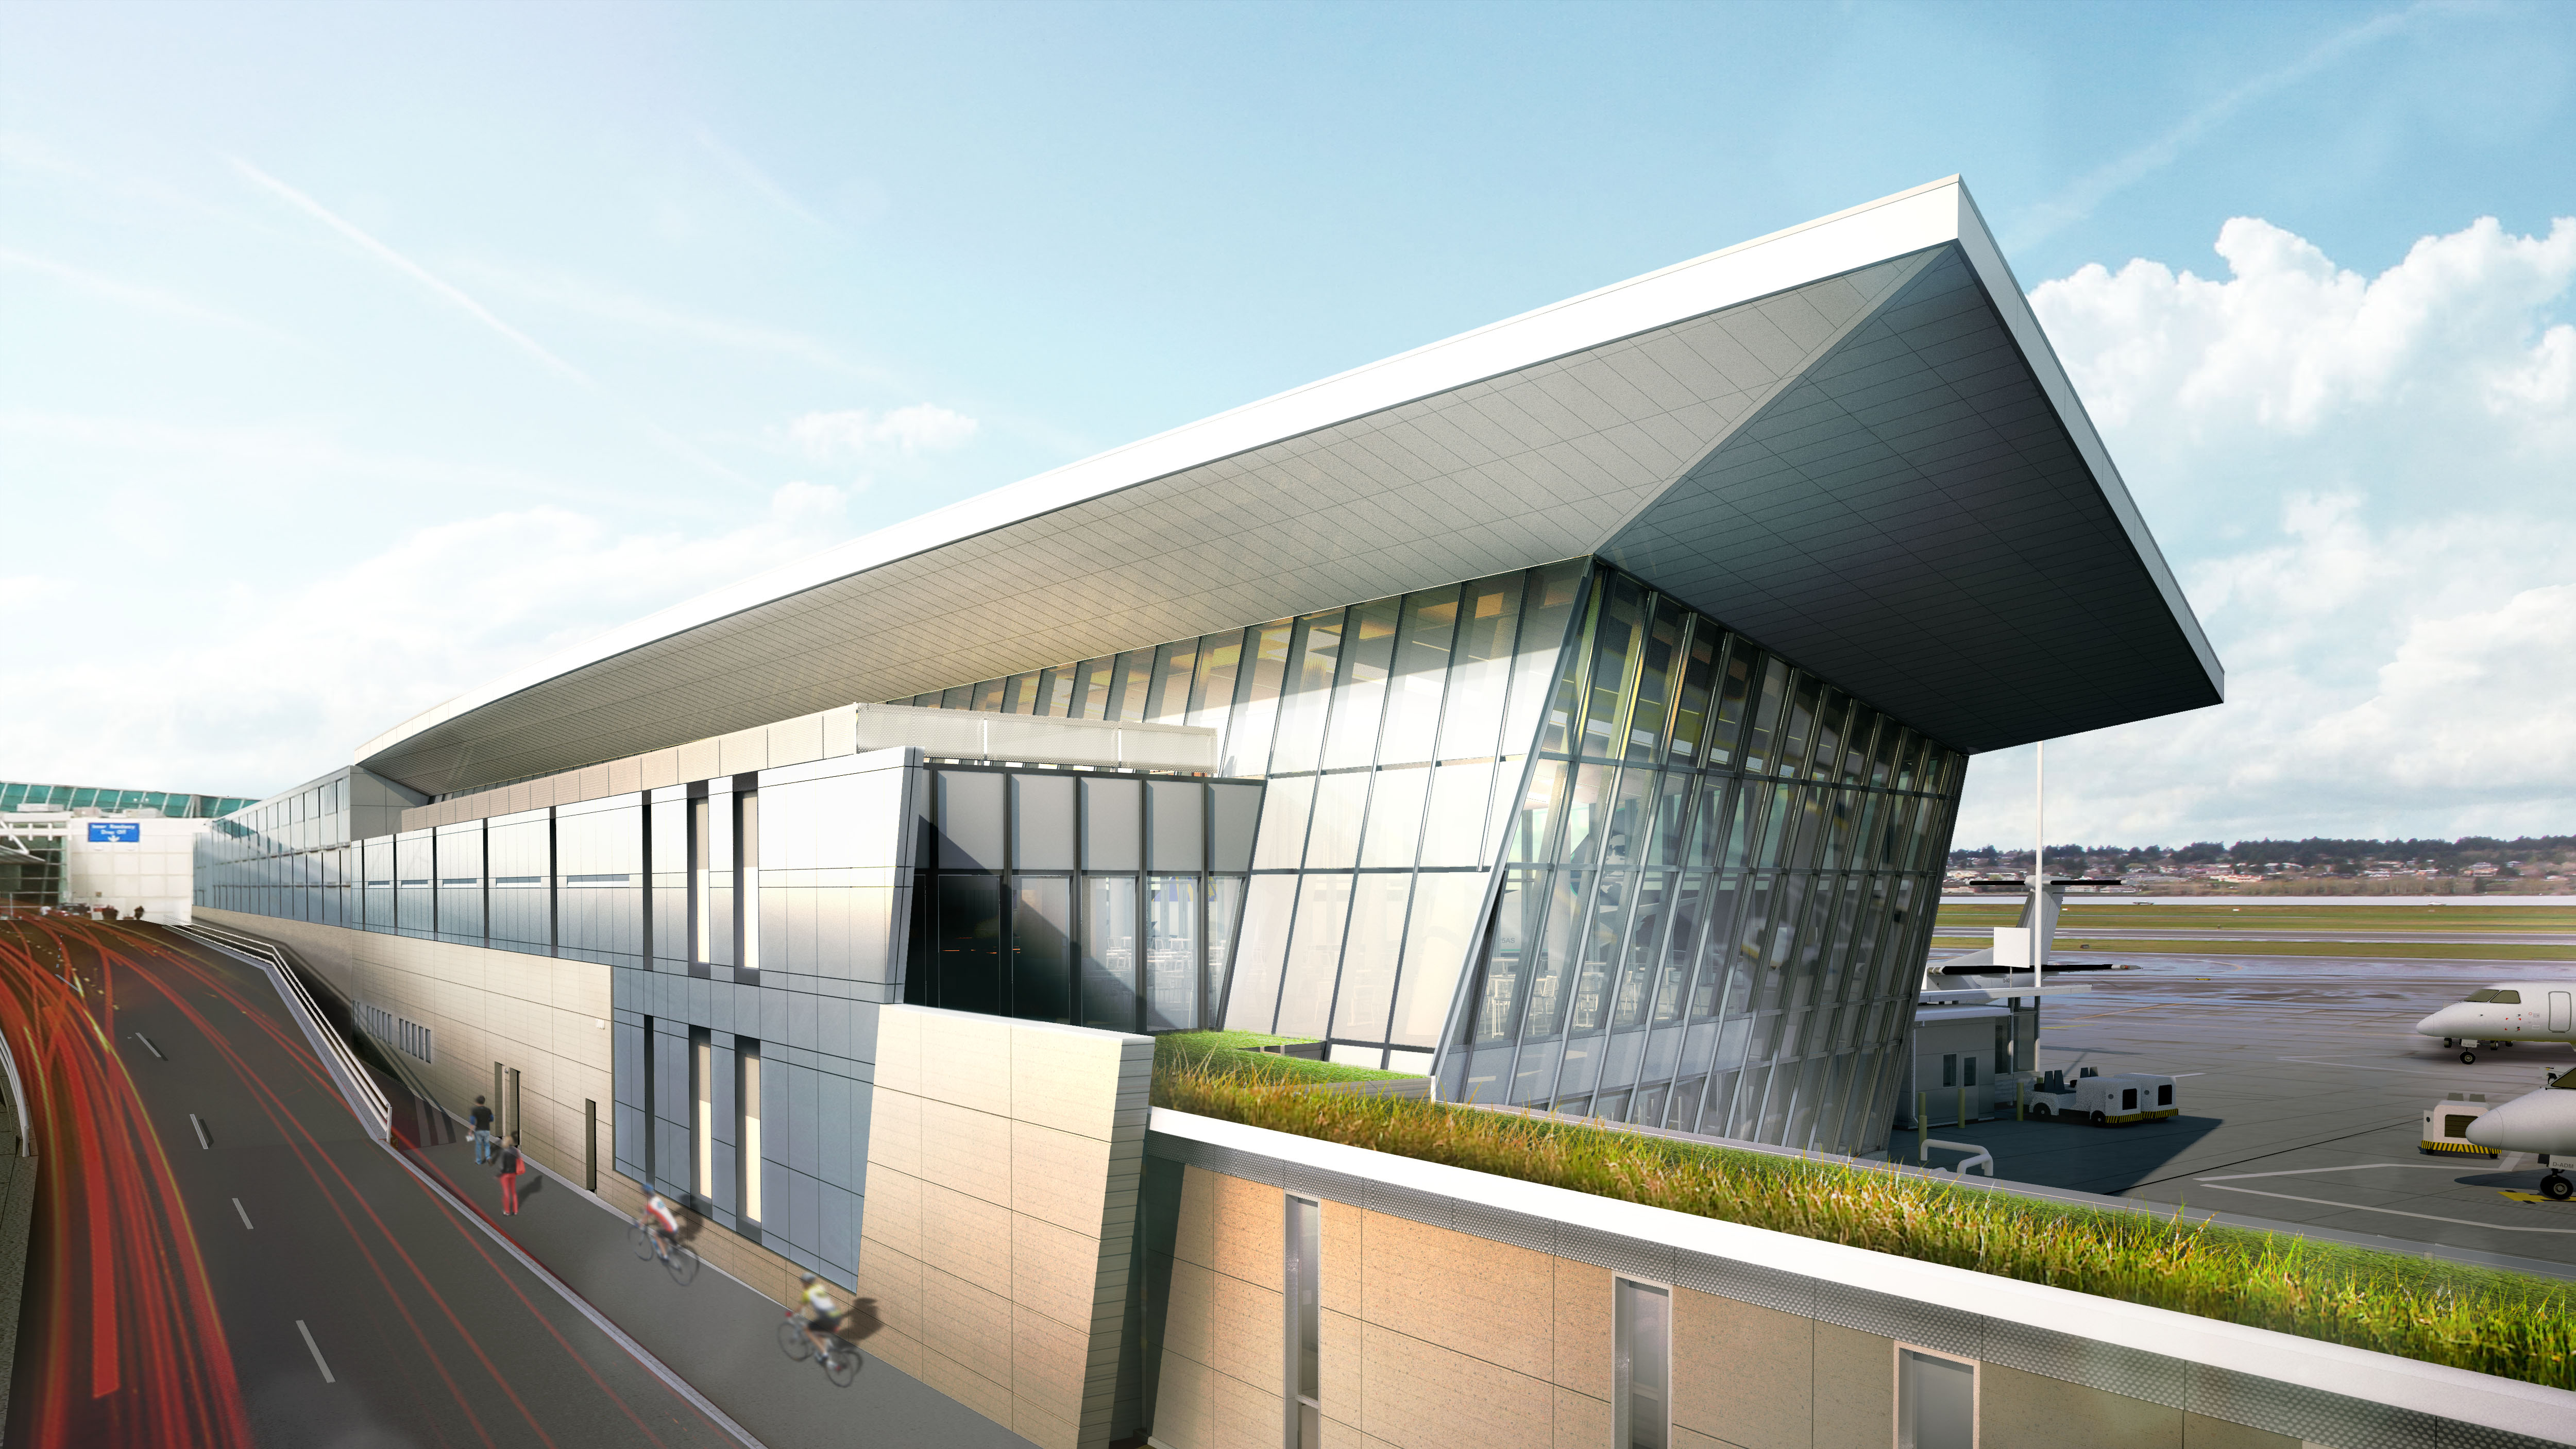 Fentress and Hennebery Eddy Architects Work as One Team to Improve Passenger Experience at the Portland International Airport